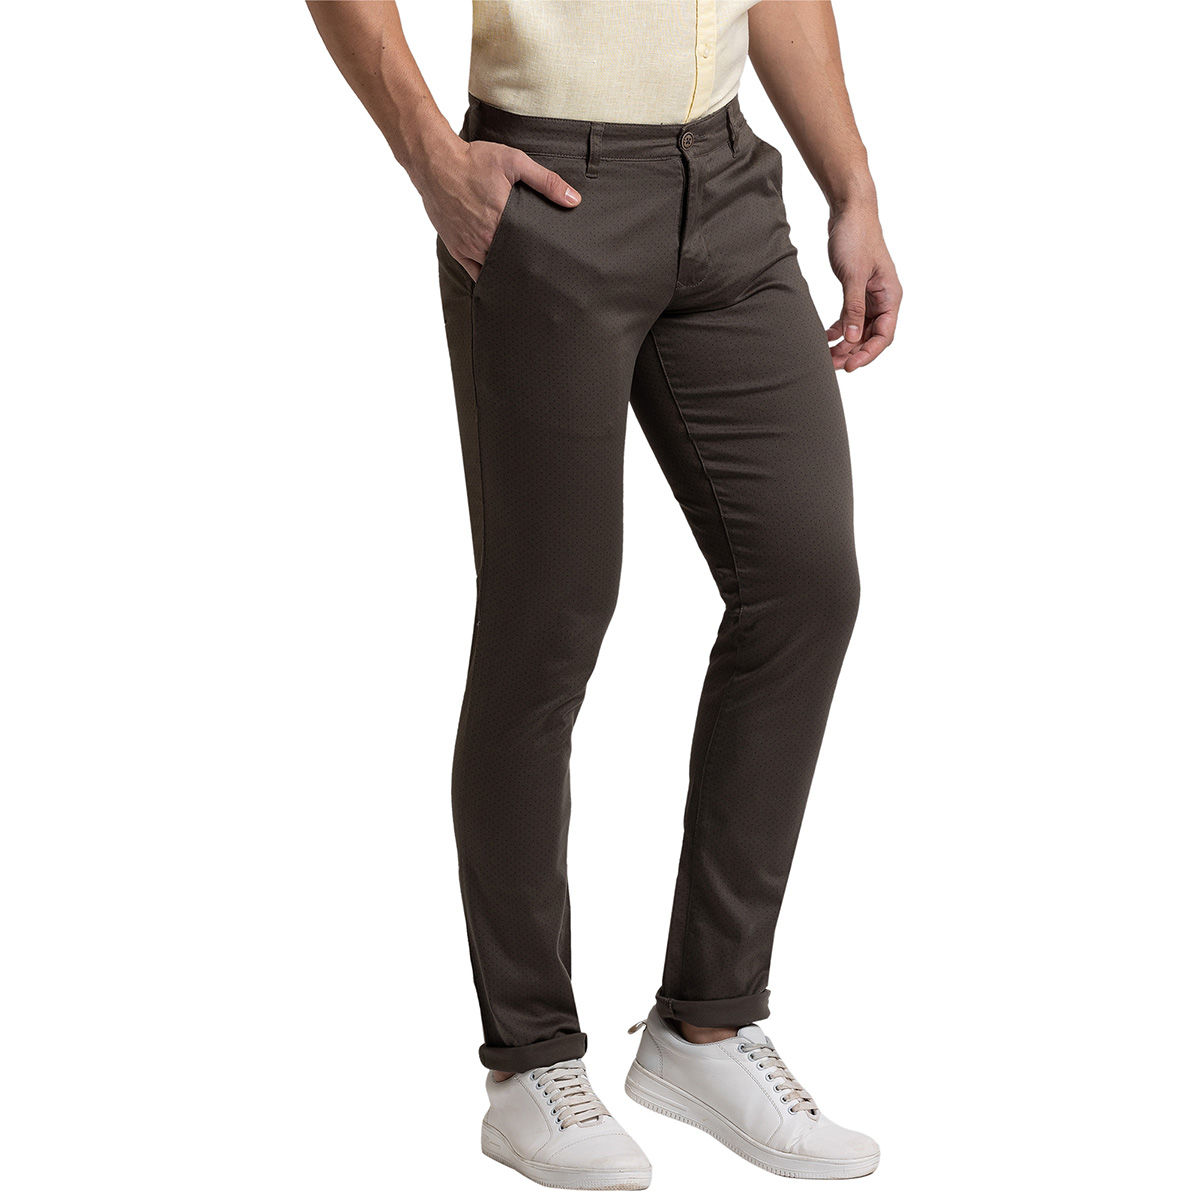 Buy Parx Tapered Fit Solid Khaki Trouser online